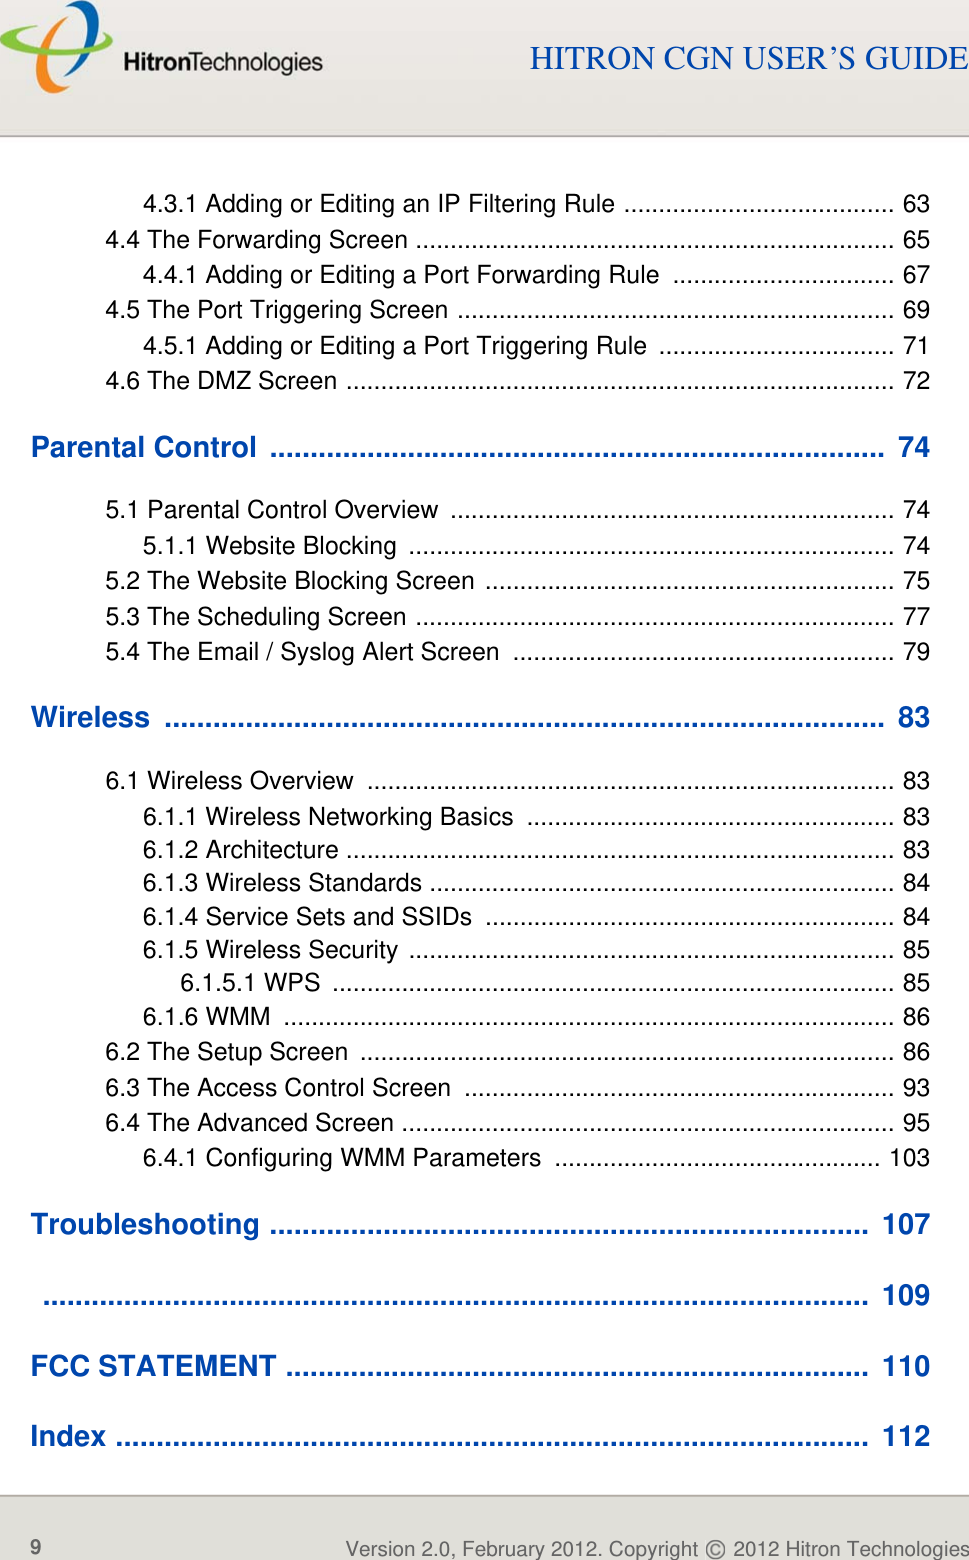 TABLE OF CONTENTSVersion 2.0, February 2012. Copyright   2012 Hitron Technologies9Version 2.0, February 2012. Copyright   2012 Hitron Technologies9HITRON CGN USER’S GUIDE4.3.1 Adding or Editing an IP Filtering Rule ....................................... 634.4 The Forwarding Screen ..................................................................... 654.4.1 Adding or Editing a Port Forwarding Rule  ................................ 674.5 The Port Triggering Screen ............................................................... 694.5.1 Adding or Editing a Port Triggering Rule  .................................. 714.6 The DMZ Screen ............................................................................... 72Parental Control  ............................................................................  745.1 Parental Control Overview  ................................................................ 745.1.1 Website Blocking  ...................................................................... 745.2 The Website Blocking Screen ........................................................... 755.3 The Scheduling Screen ..................................................................... 775.4 The Email / Syslog Alert Screen  ....................................................... 79Wireless .........................................................................................  836.1 Wireless Overview  ............................................................................ 836.1.1 Wireless Networking Basics ..................................................... 836.1.2 Architecture ............................................................................... 836.1.3 Wireless Standards ................................................................... 846.1.4 Service Sets and SSIDs  ........................................................... 846.1.5 Wireless Security ...................................................................... 856.1.5.1 WPS  ................................................................................. 856.1.6 WMM  ........................................................................................ 866.2 The Setup Screen  ............................................................................. 866.3 The Access Control Screen .............................................................. 936.4 The Advanced Screen ....................................................................... 956.4.1 Configuring WMM Parameters  ............................................... 103Troubleshooting ..........................................................................  107 ......................................................................................................  109FCC STATEMENT ........................................................................  110Index .............................................................................................  112